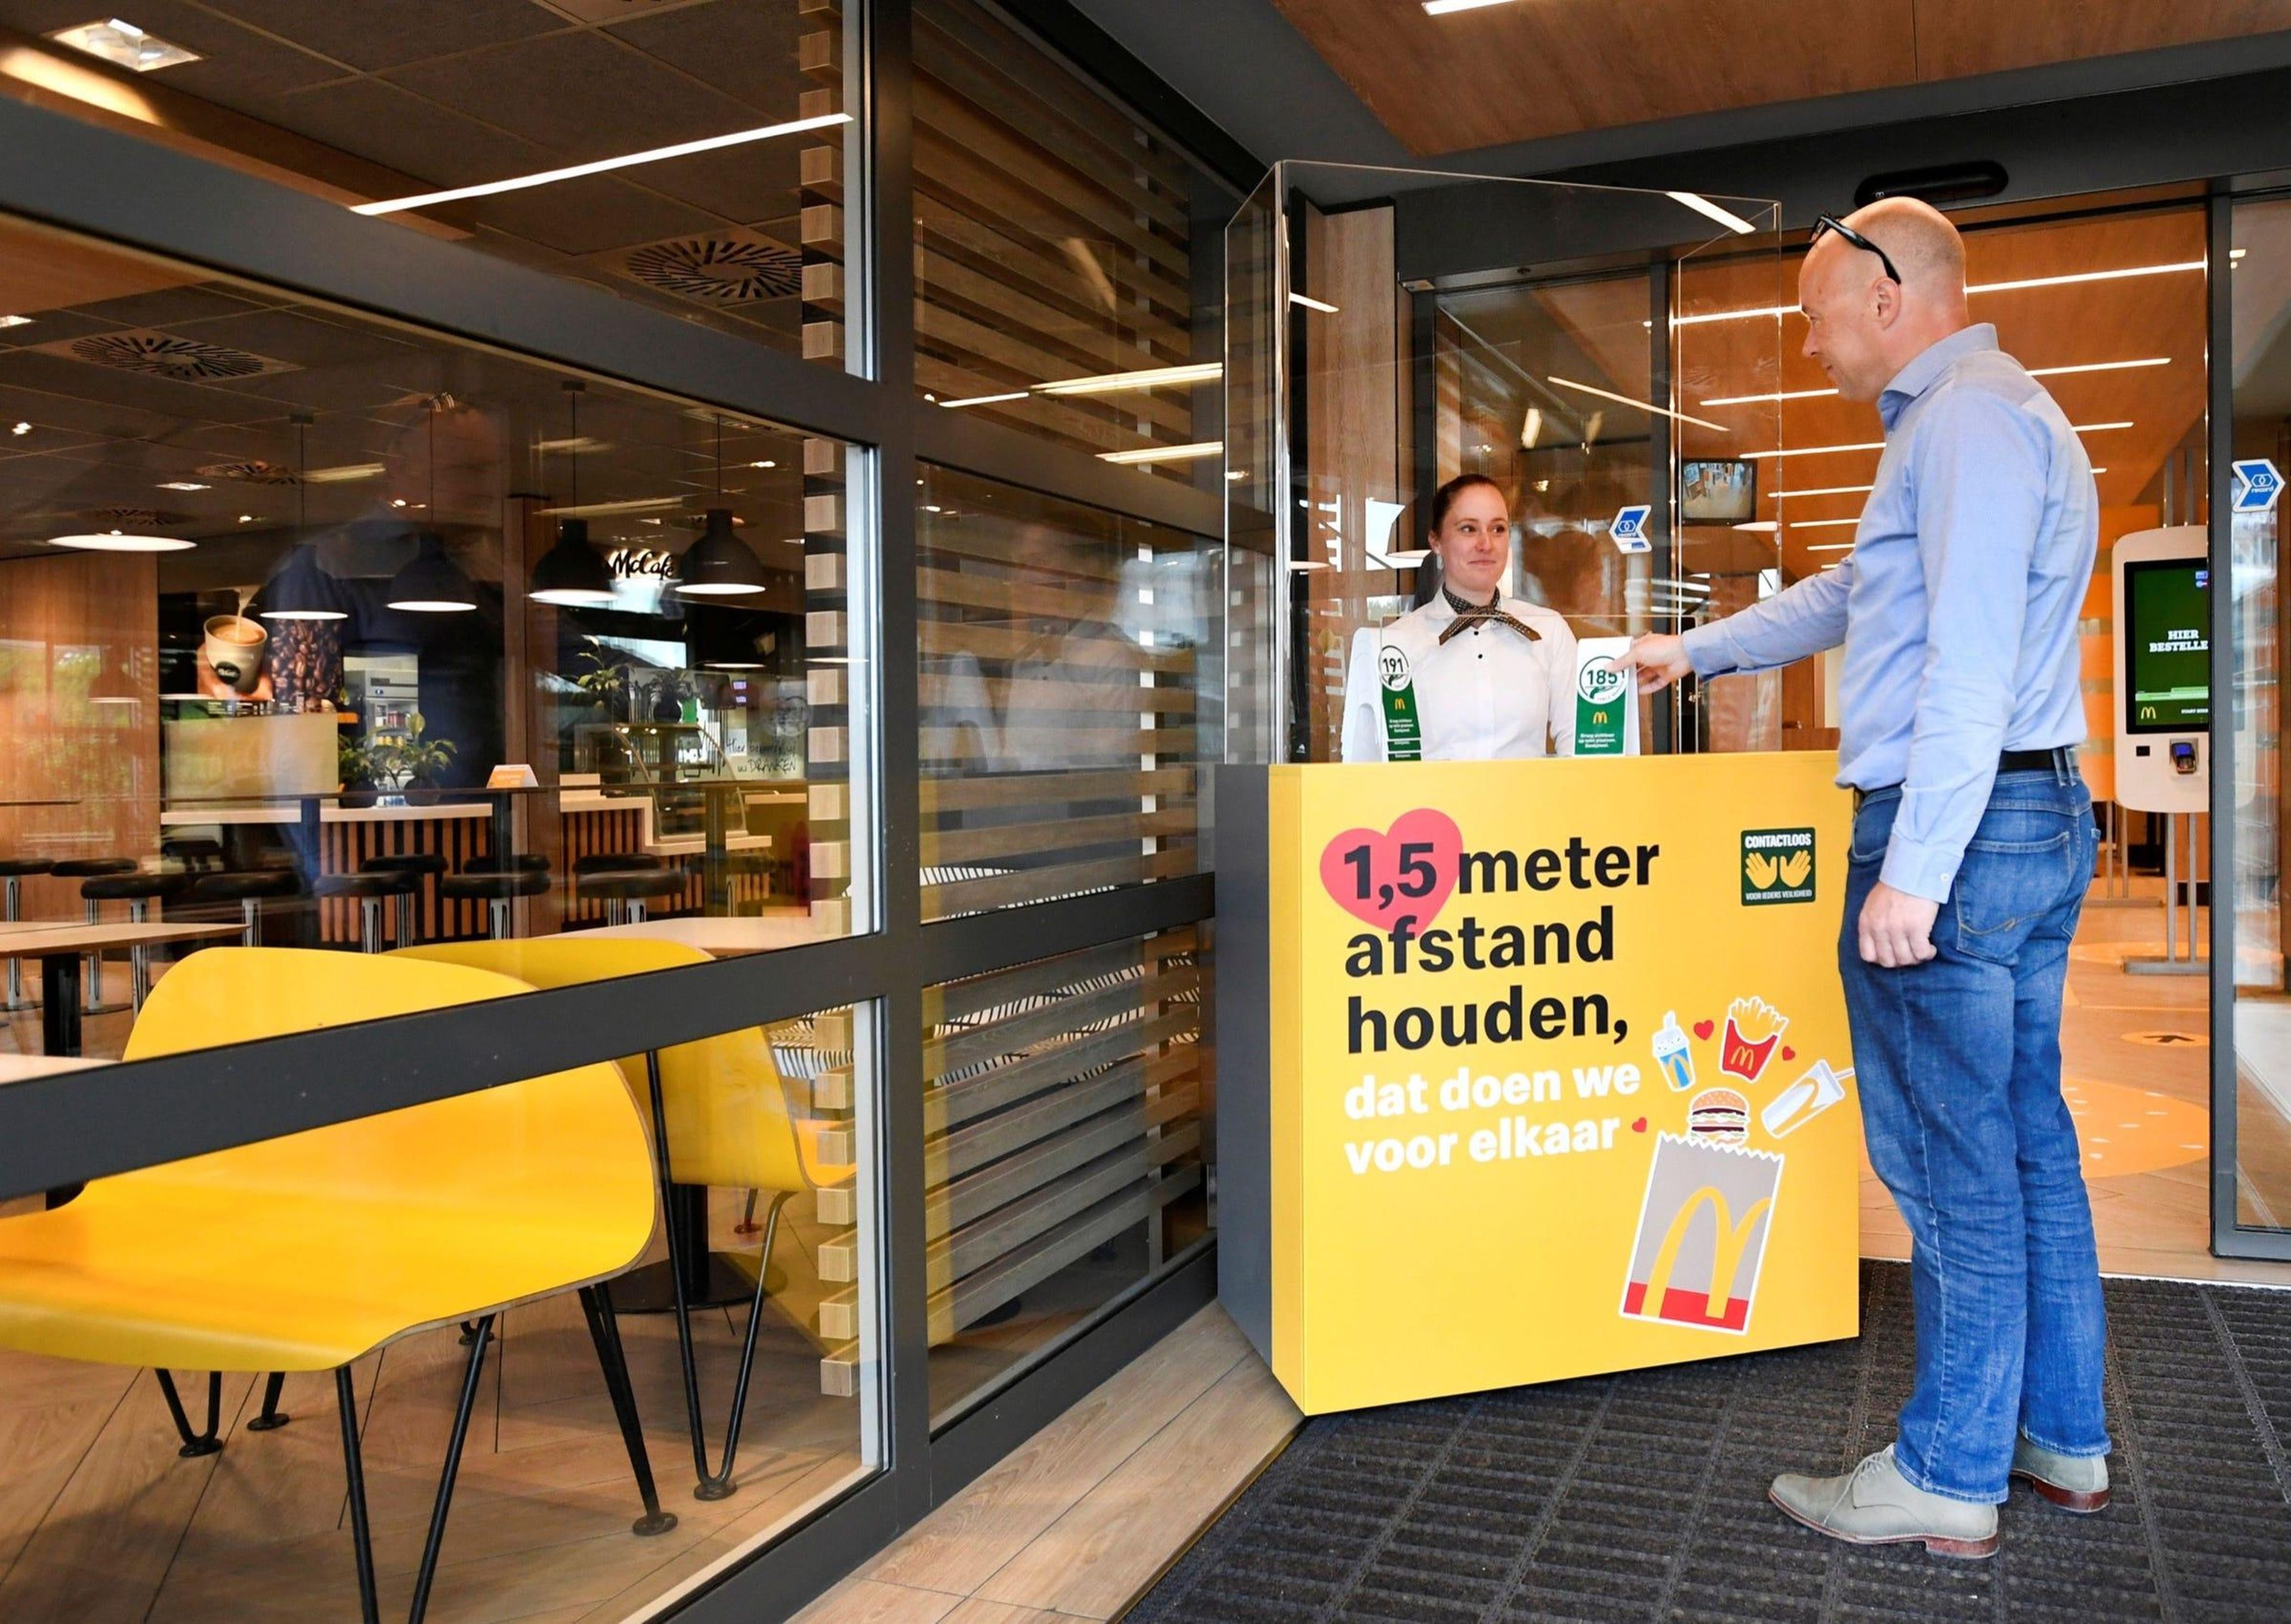 Restaurants have not yet reopened in the Netherlands, but if they do, customers will need to stay 1.5 meters or 5 feet away from each other.